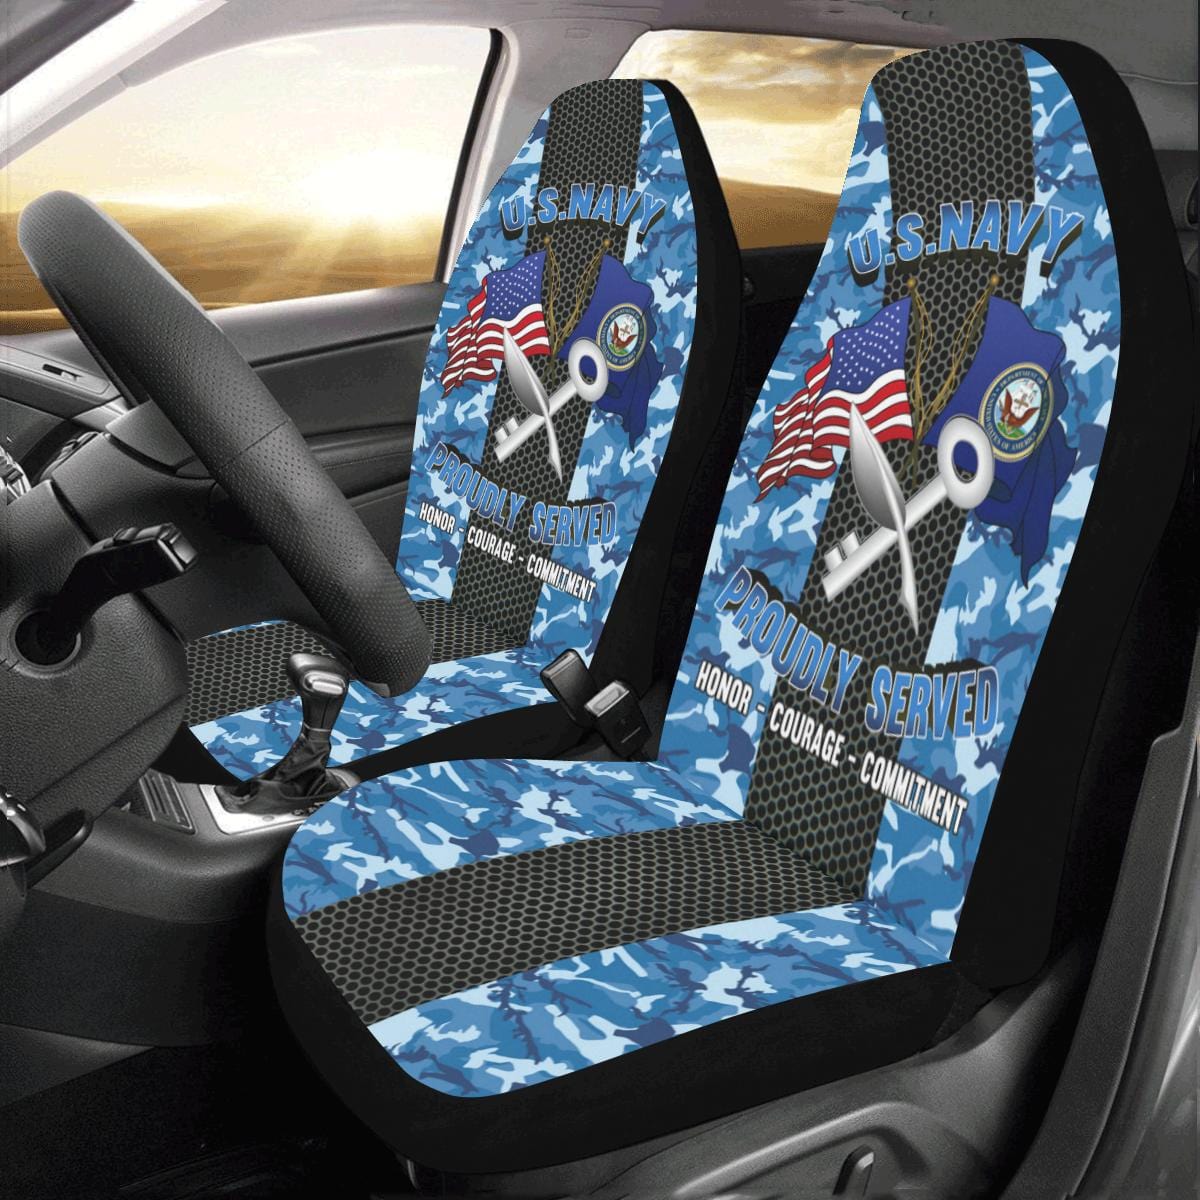 Navy Ship's Serviceman Navy SH Car Seat Covers (Set of 2)-SeatCovers-Navy-Rate-Veterans Nation